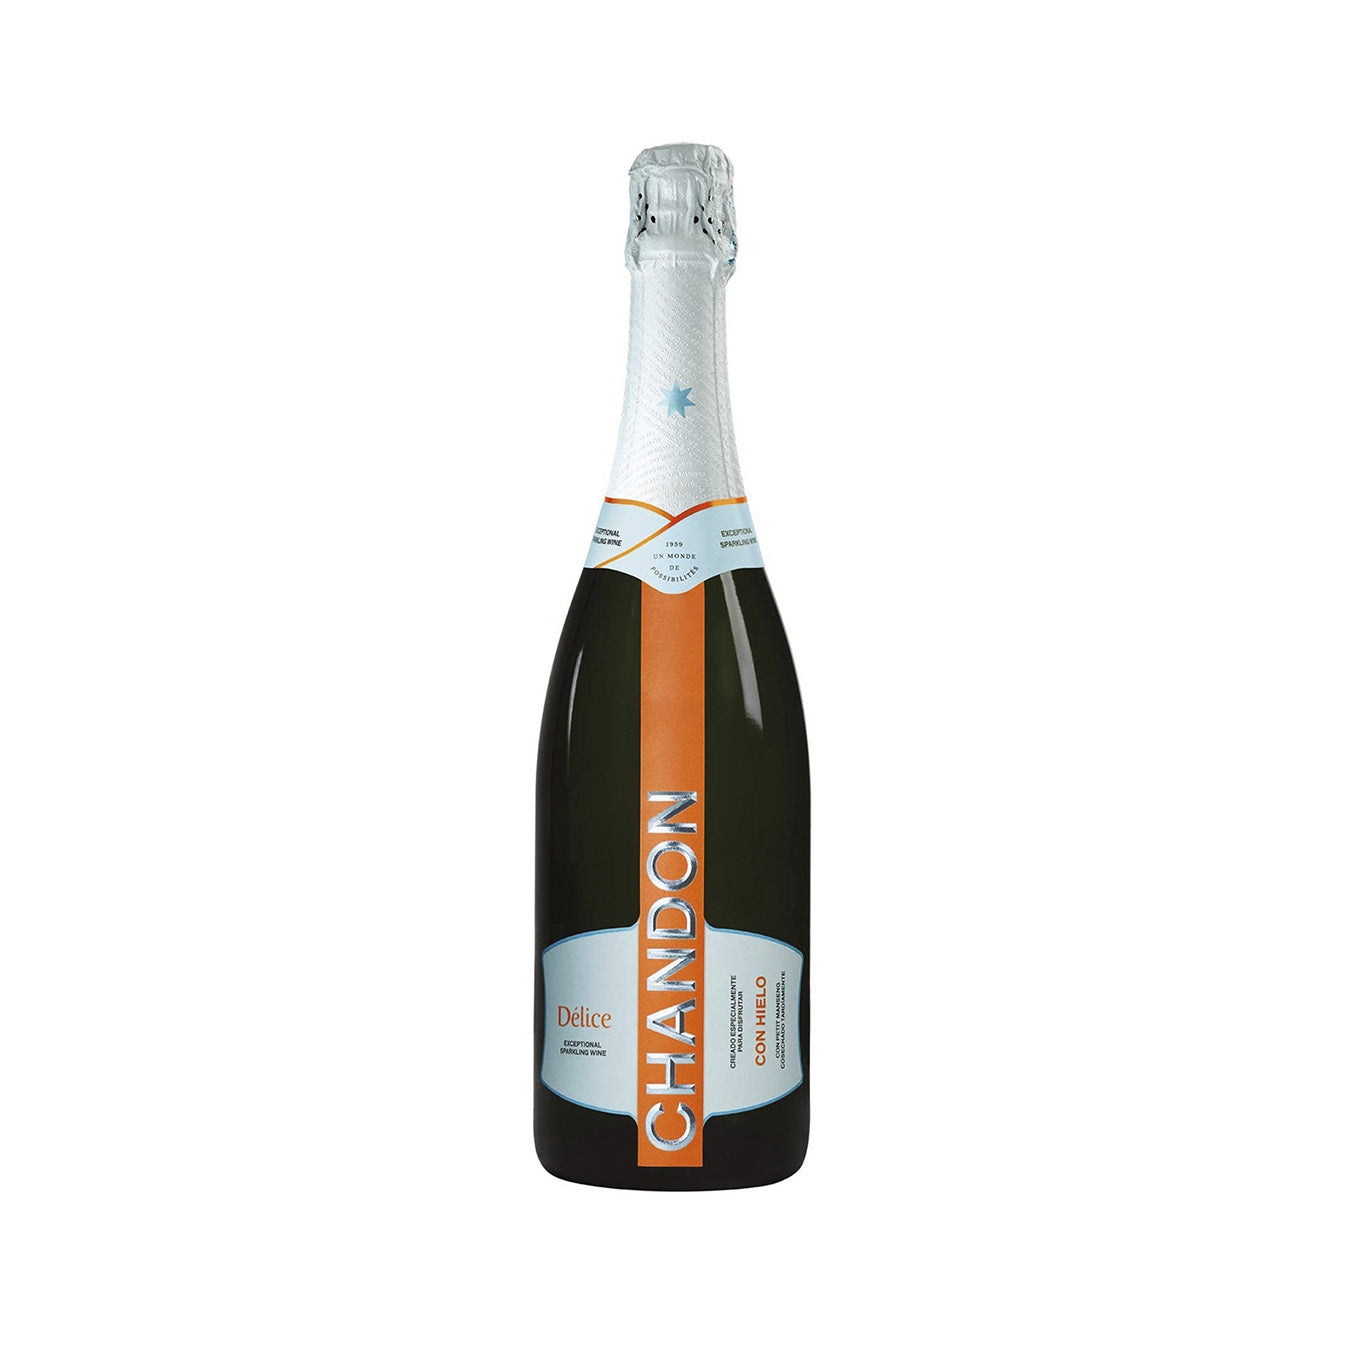 CHANDON DELICE 750 MLT 11.5%